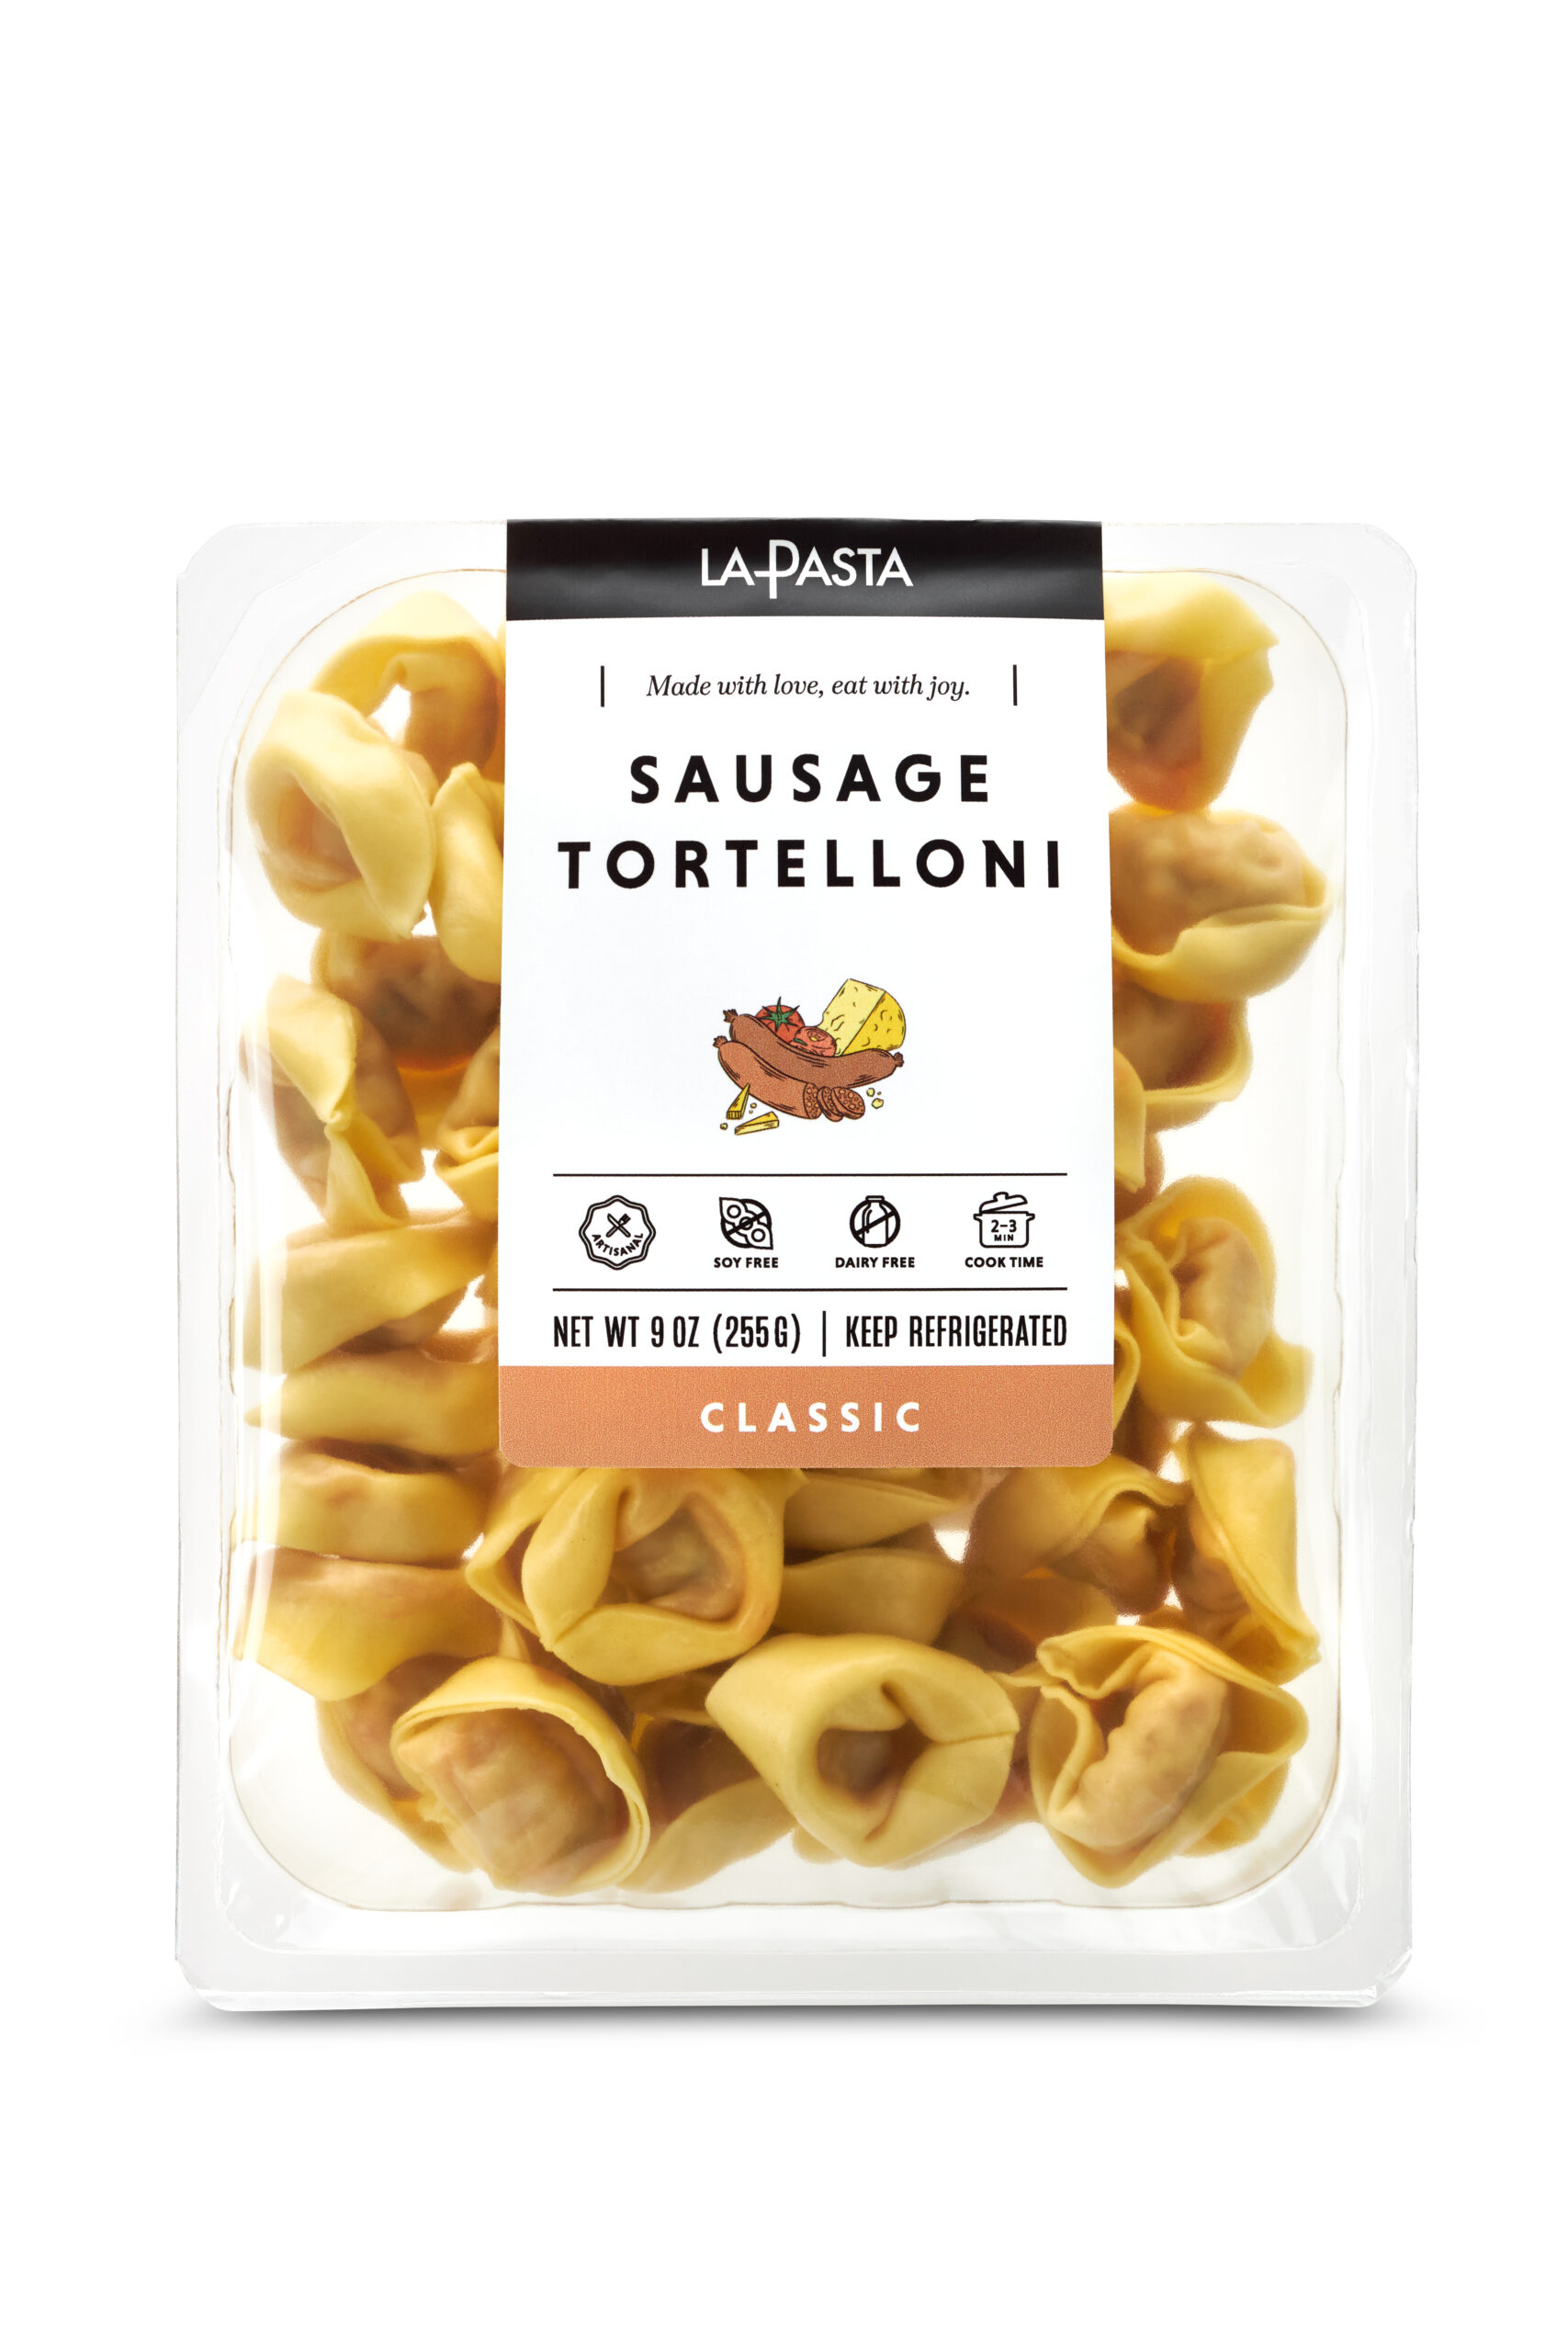 A package of sausage tortelloni is shown.